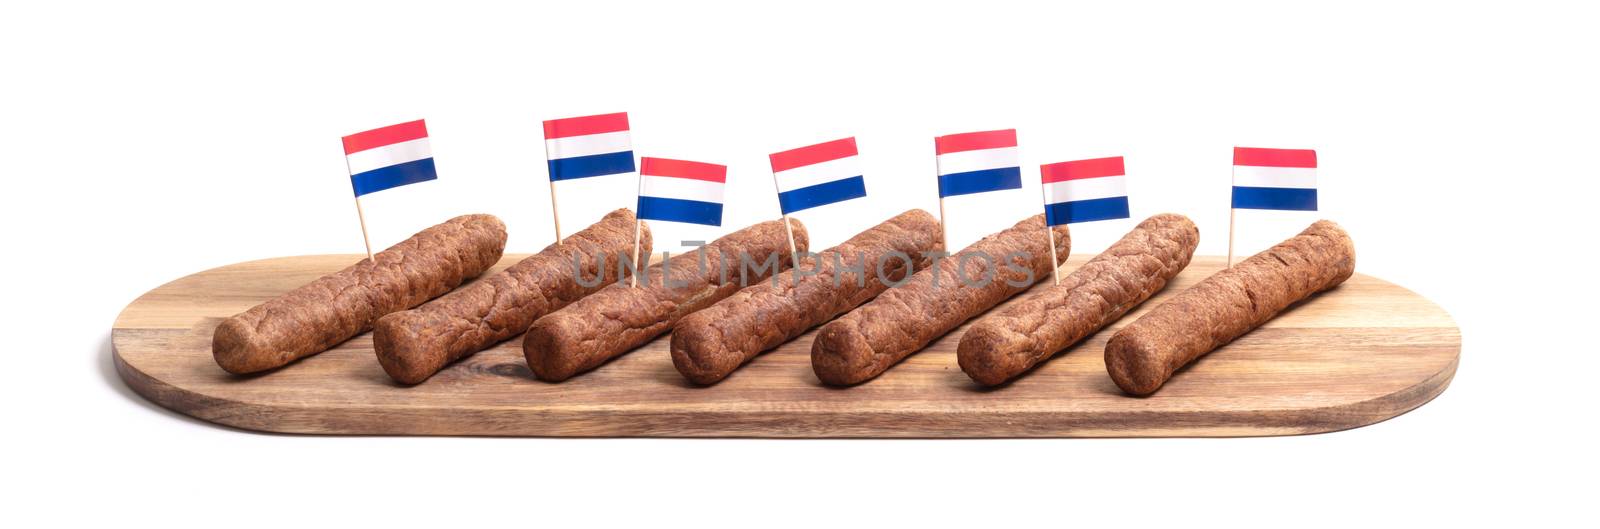 Wooden tray with frikadellen, a Dutch fast food snack, isolated